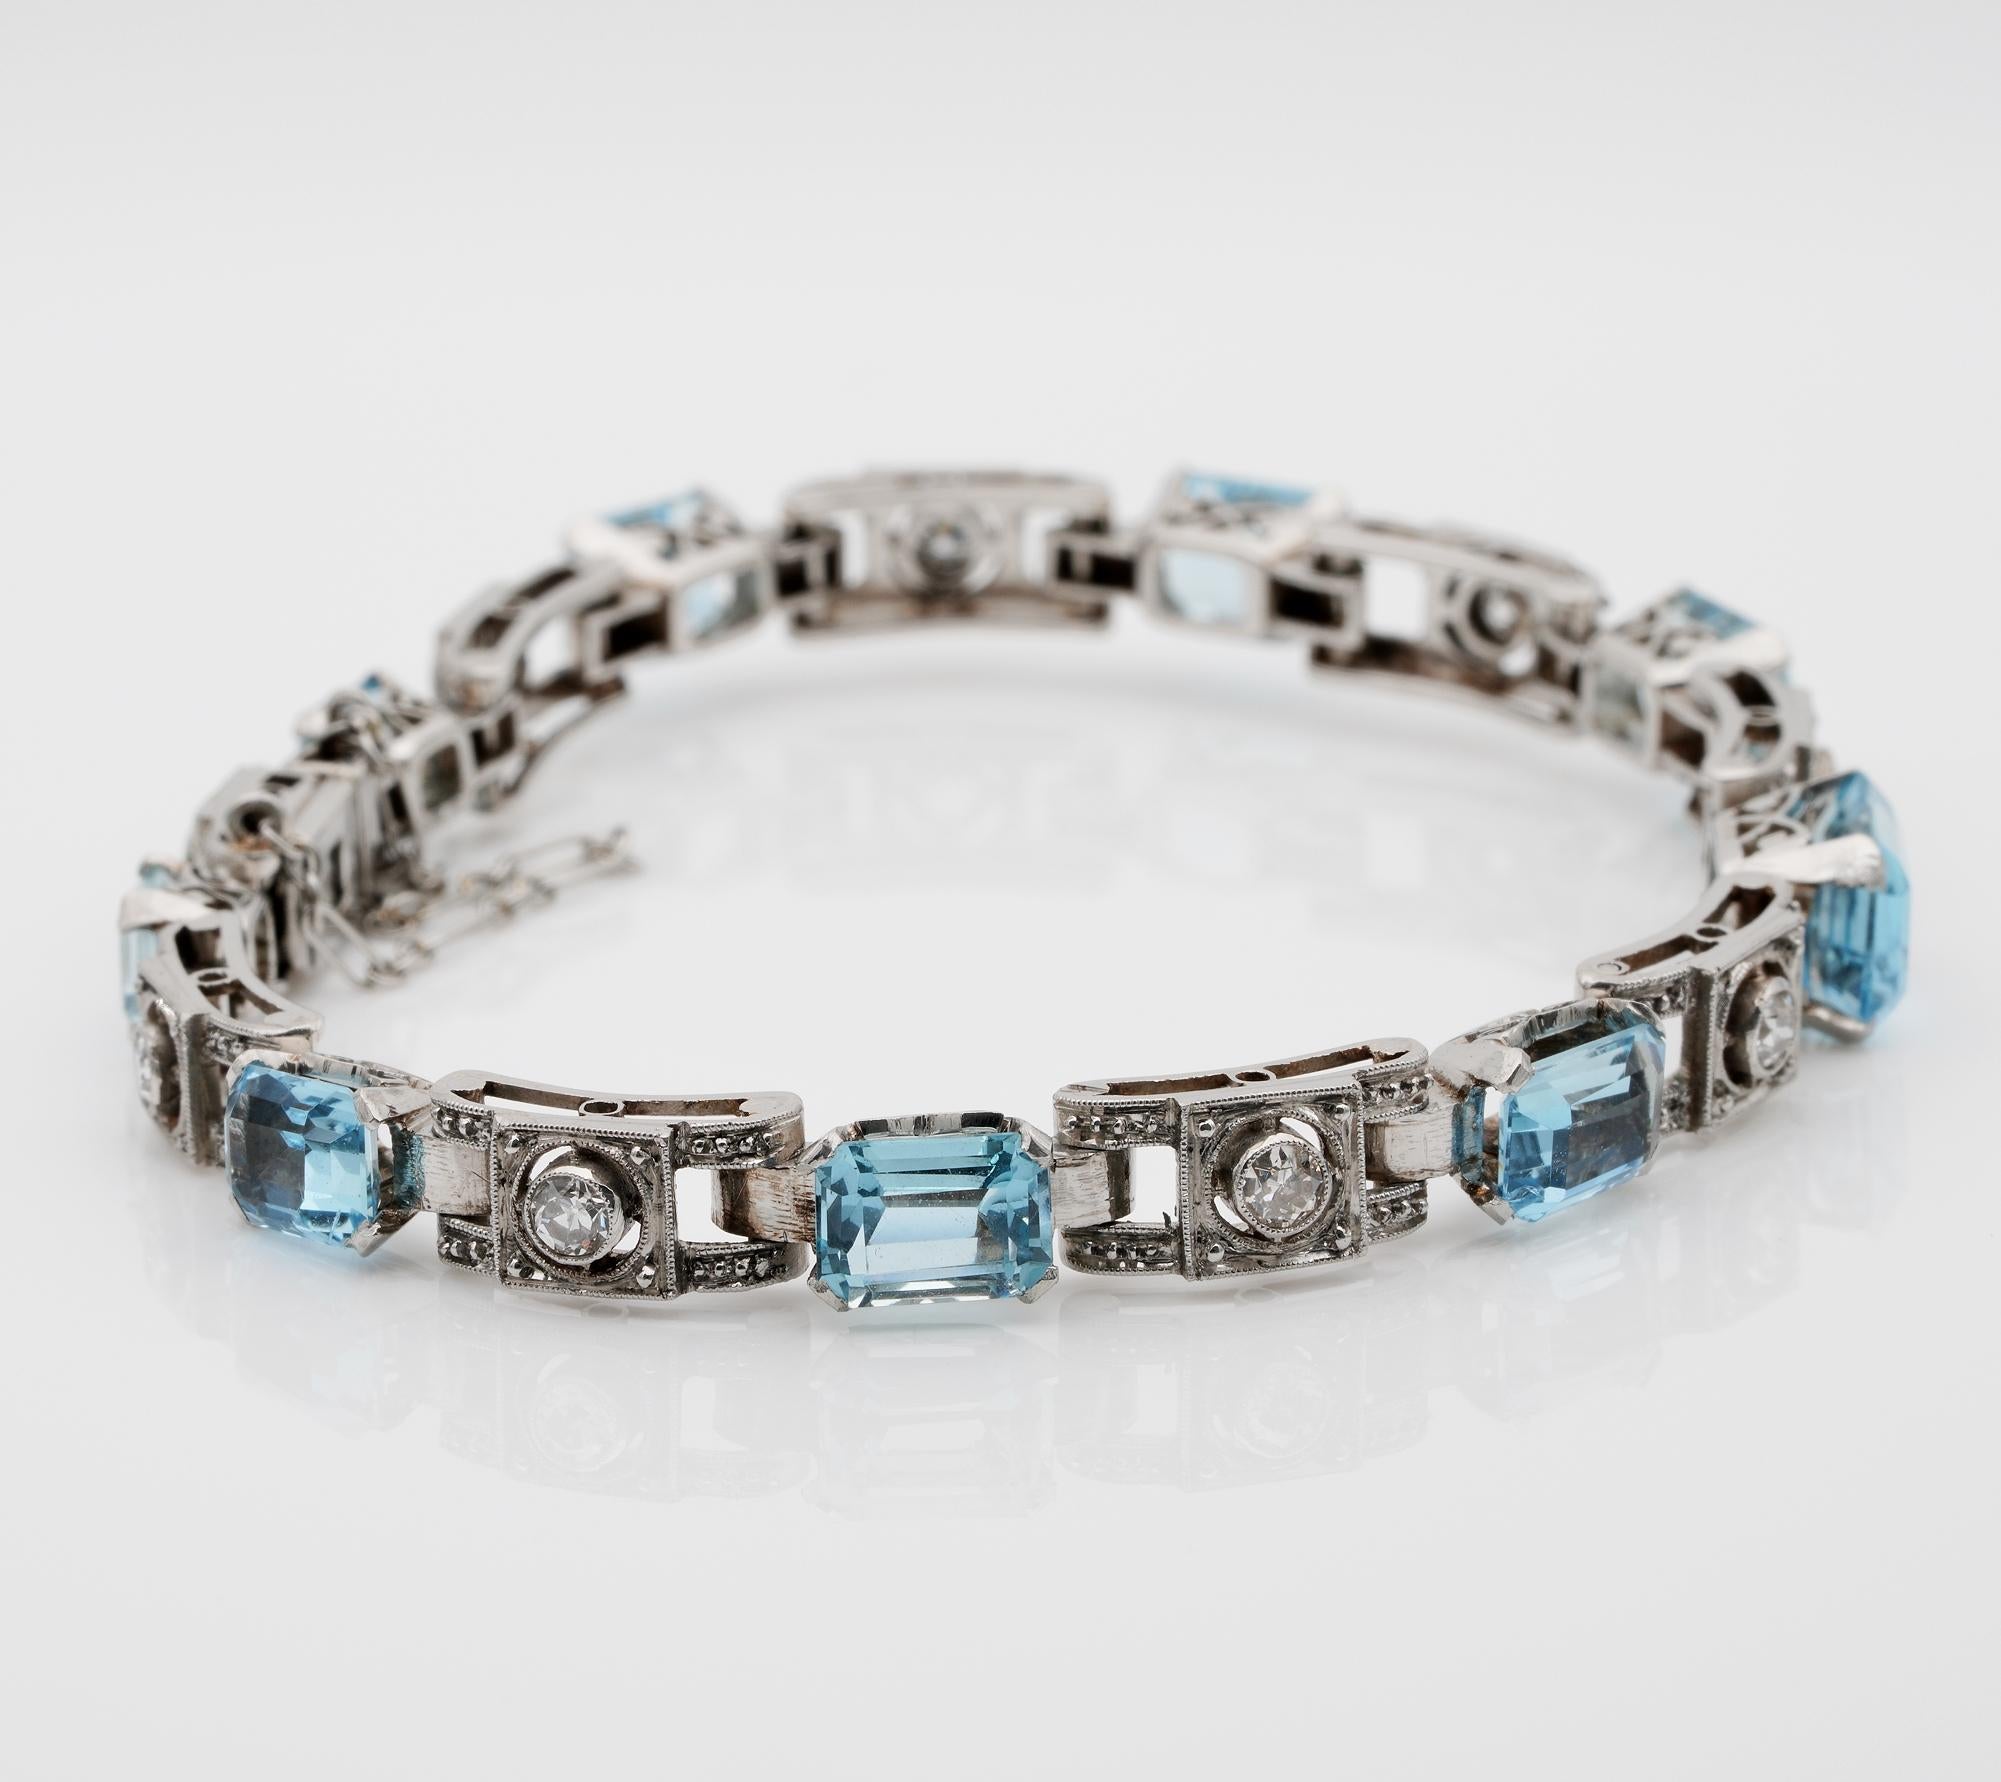 Enduring Memories

An exceptionally beautiful, wearable and versatile Art Deco bracelet for today’s lifestyles
Rare, authentic, Art Deco at peak, heavily constructed out of Platinum in a delightful geometric pattern Diamond links so loved in the